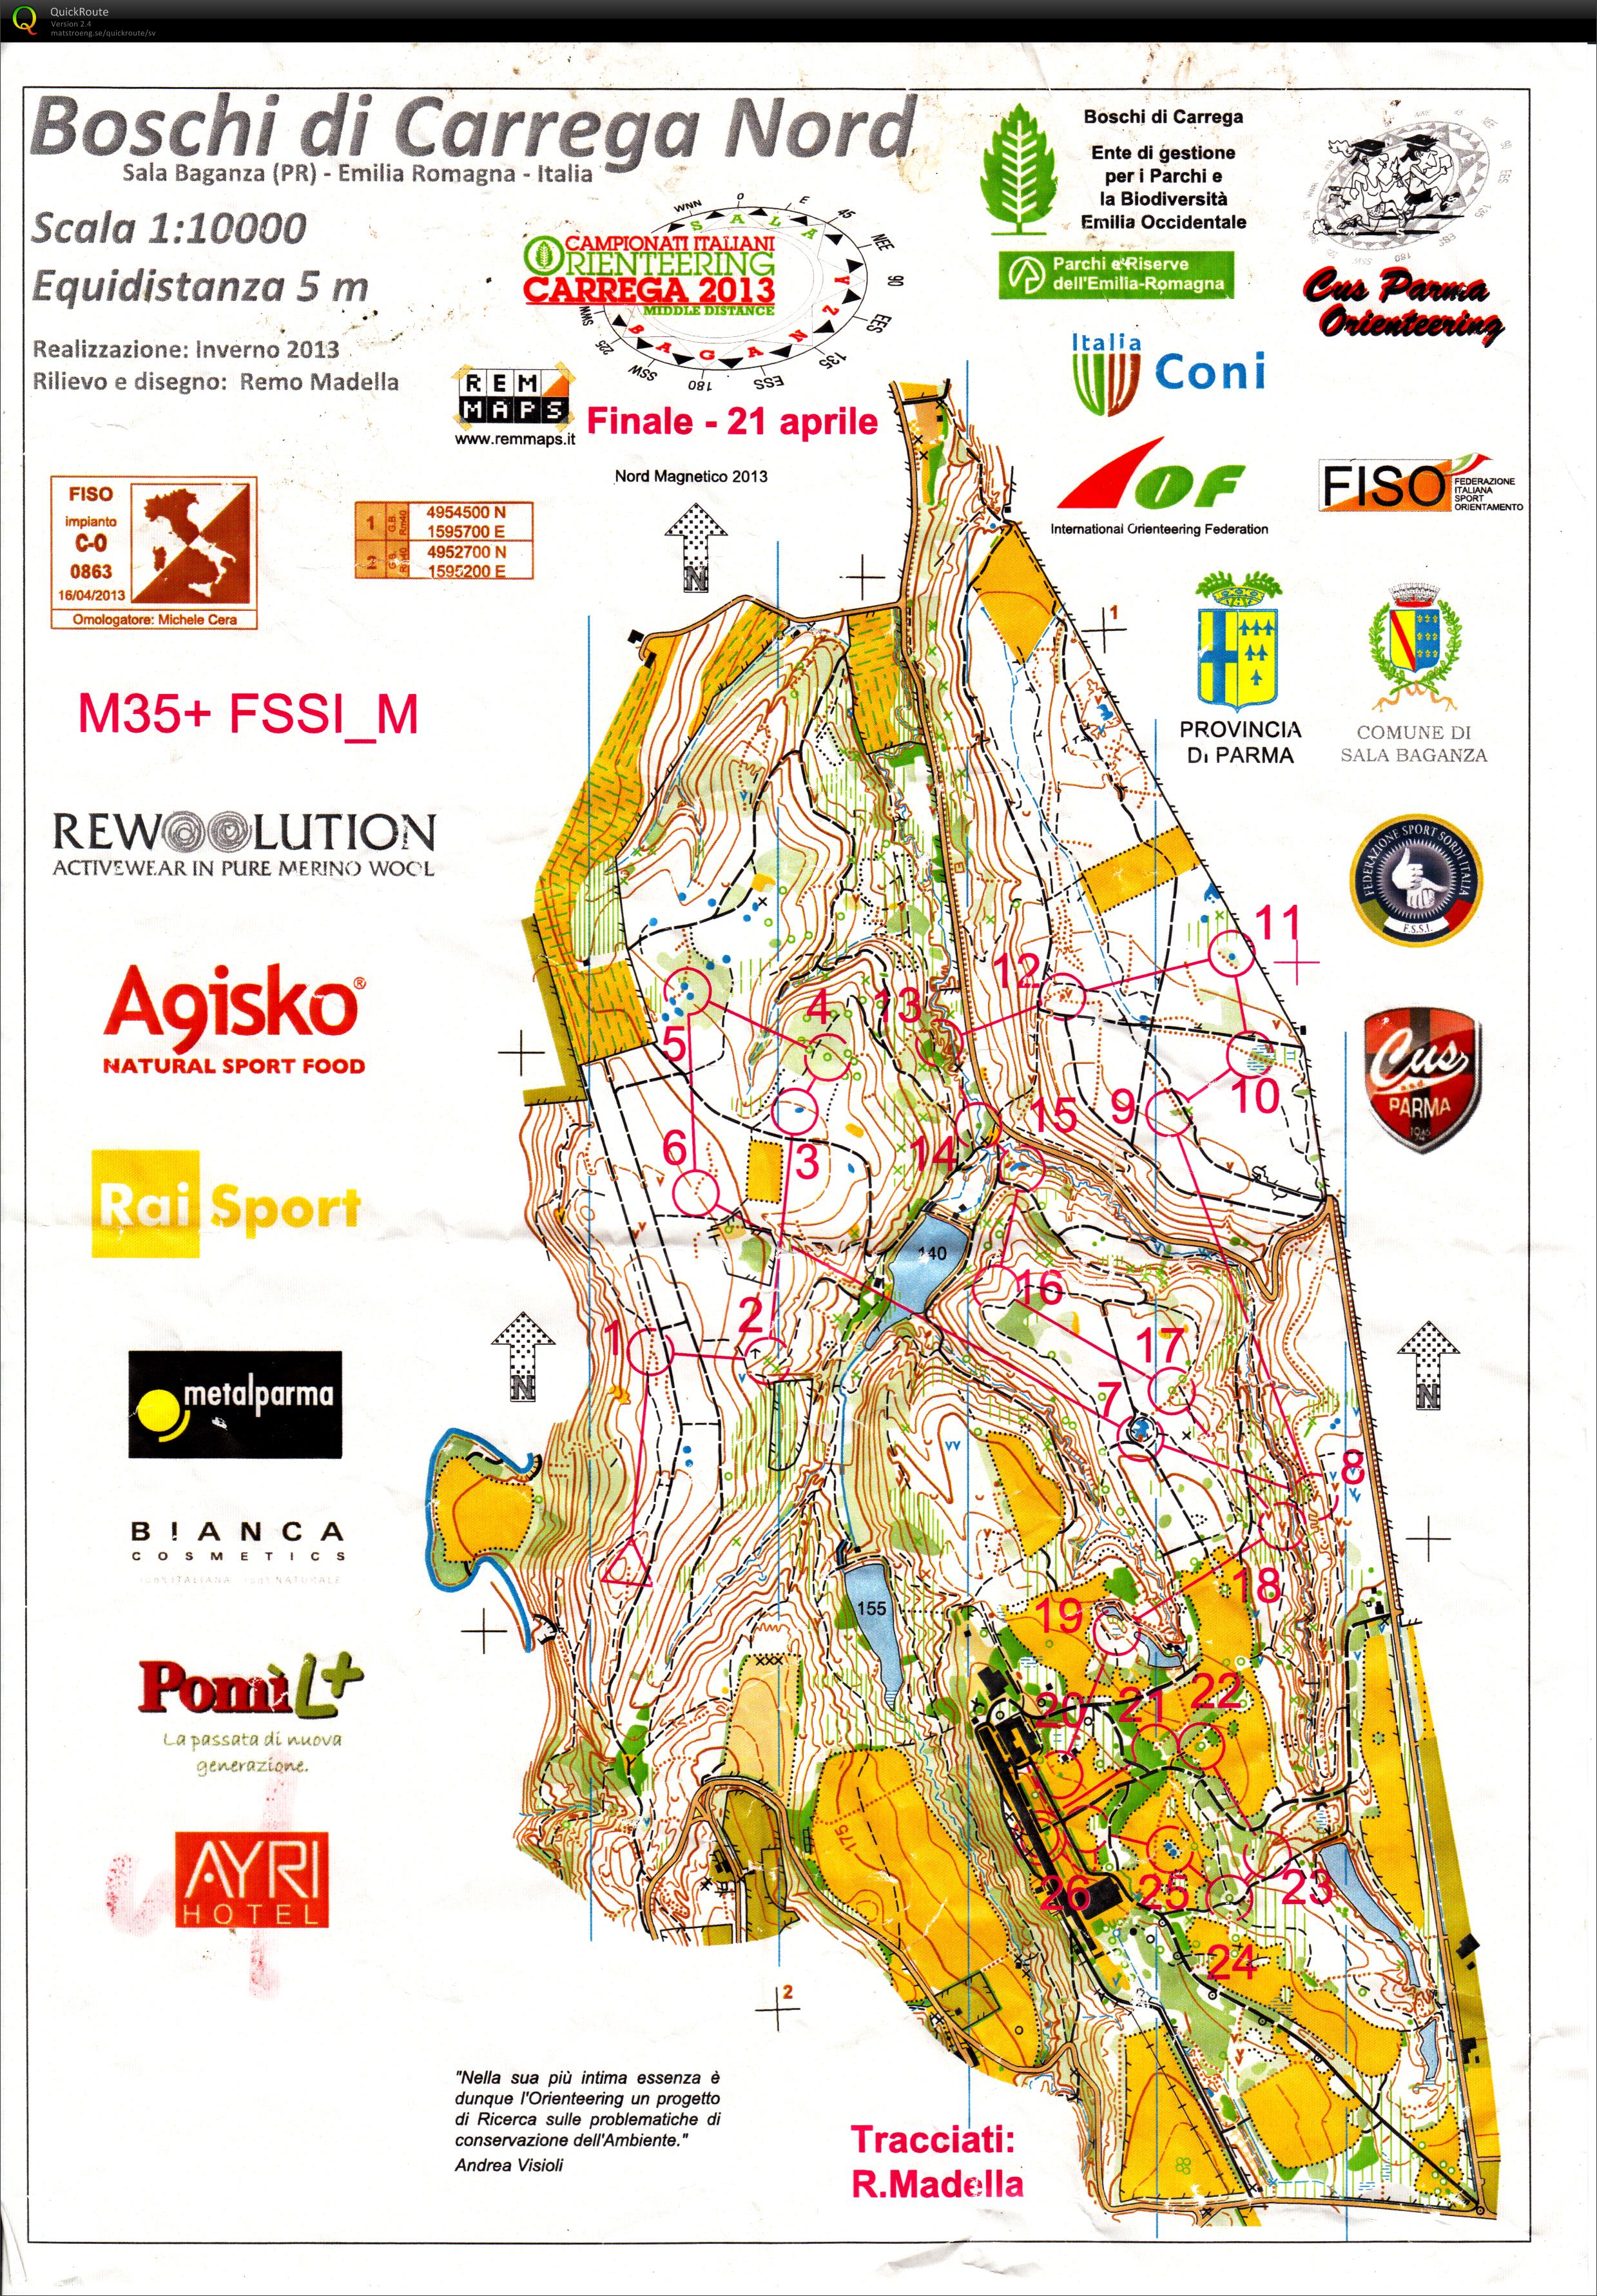 Italian Championship Middle Distance Final (21/04/2013)